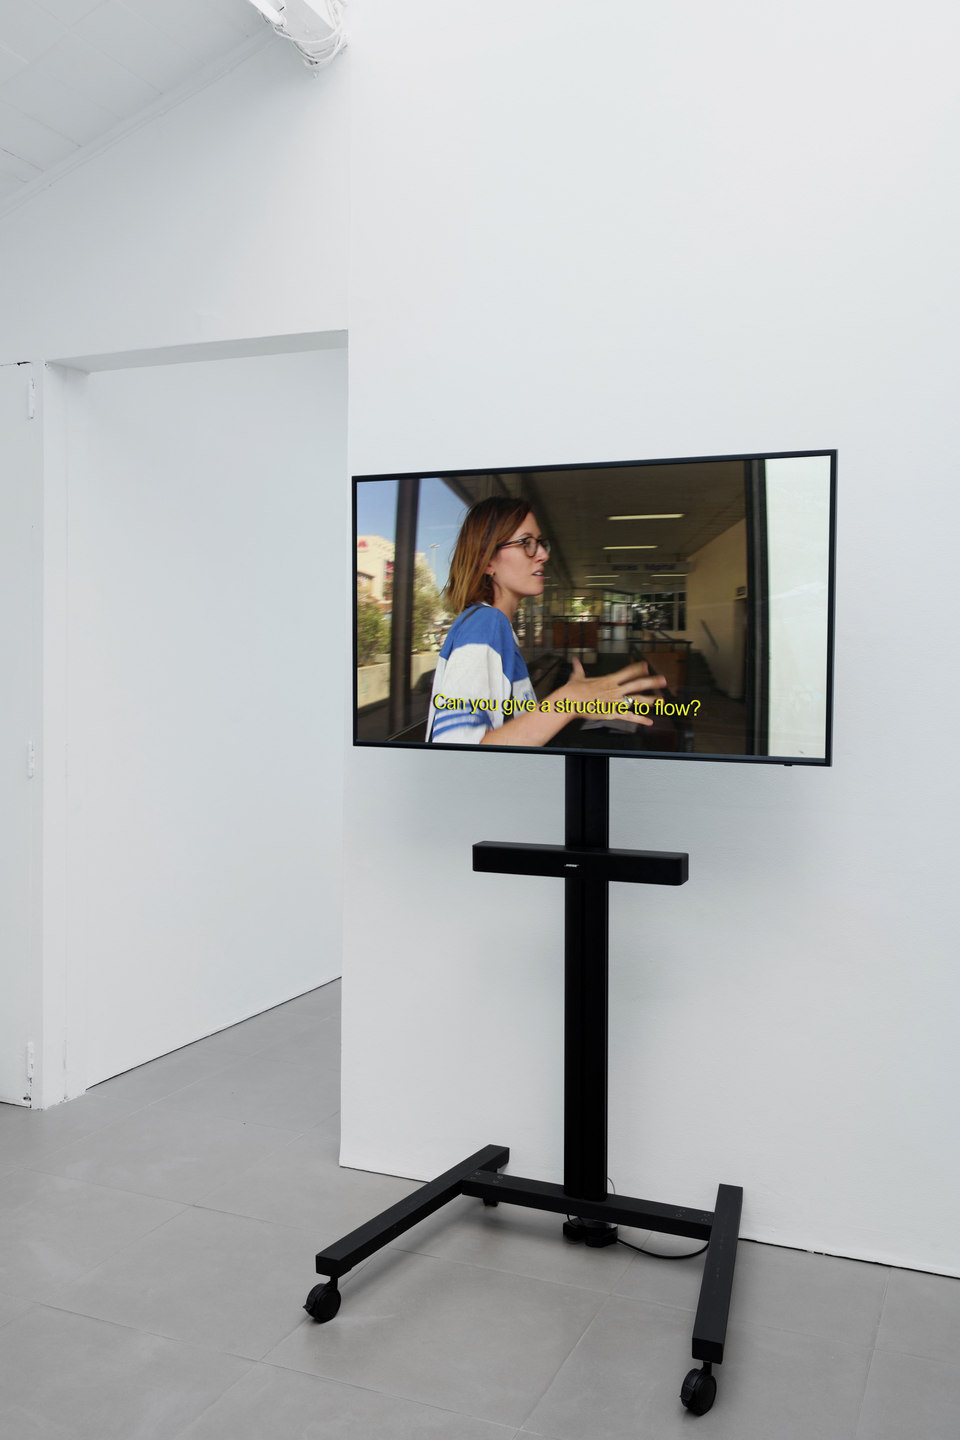 Camilla Wills, Channels, 2015, digital HD video, 3:26 mins, Cell Project Space